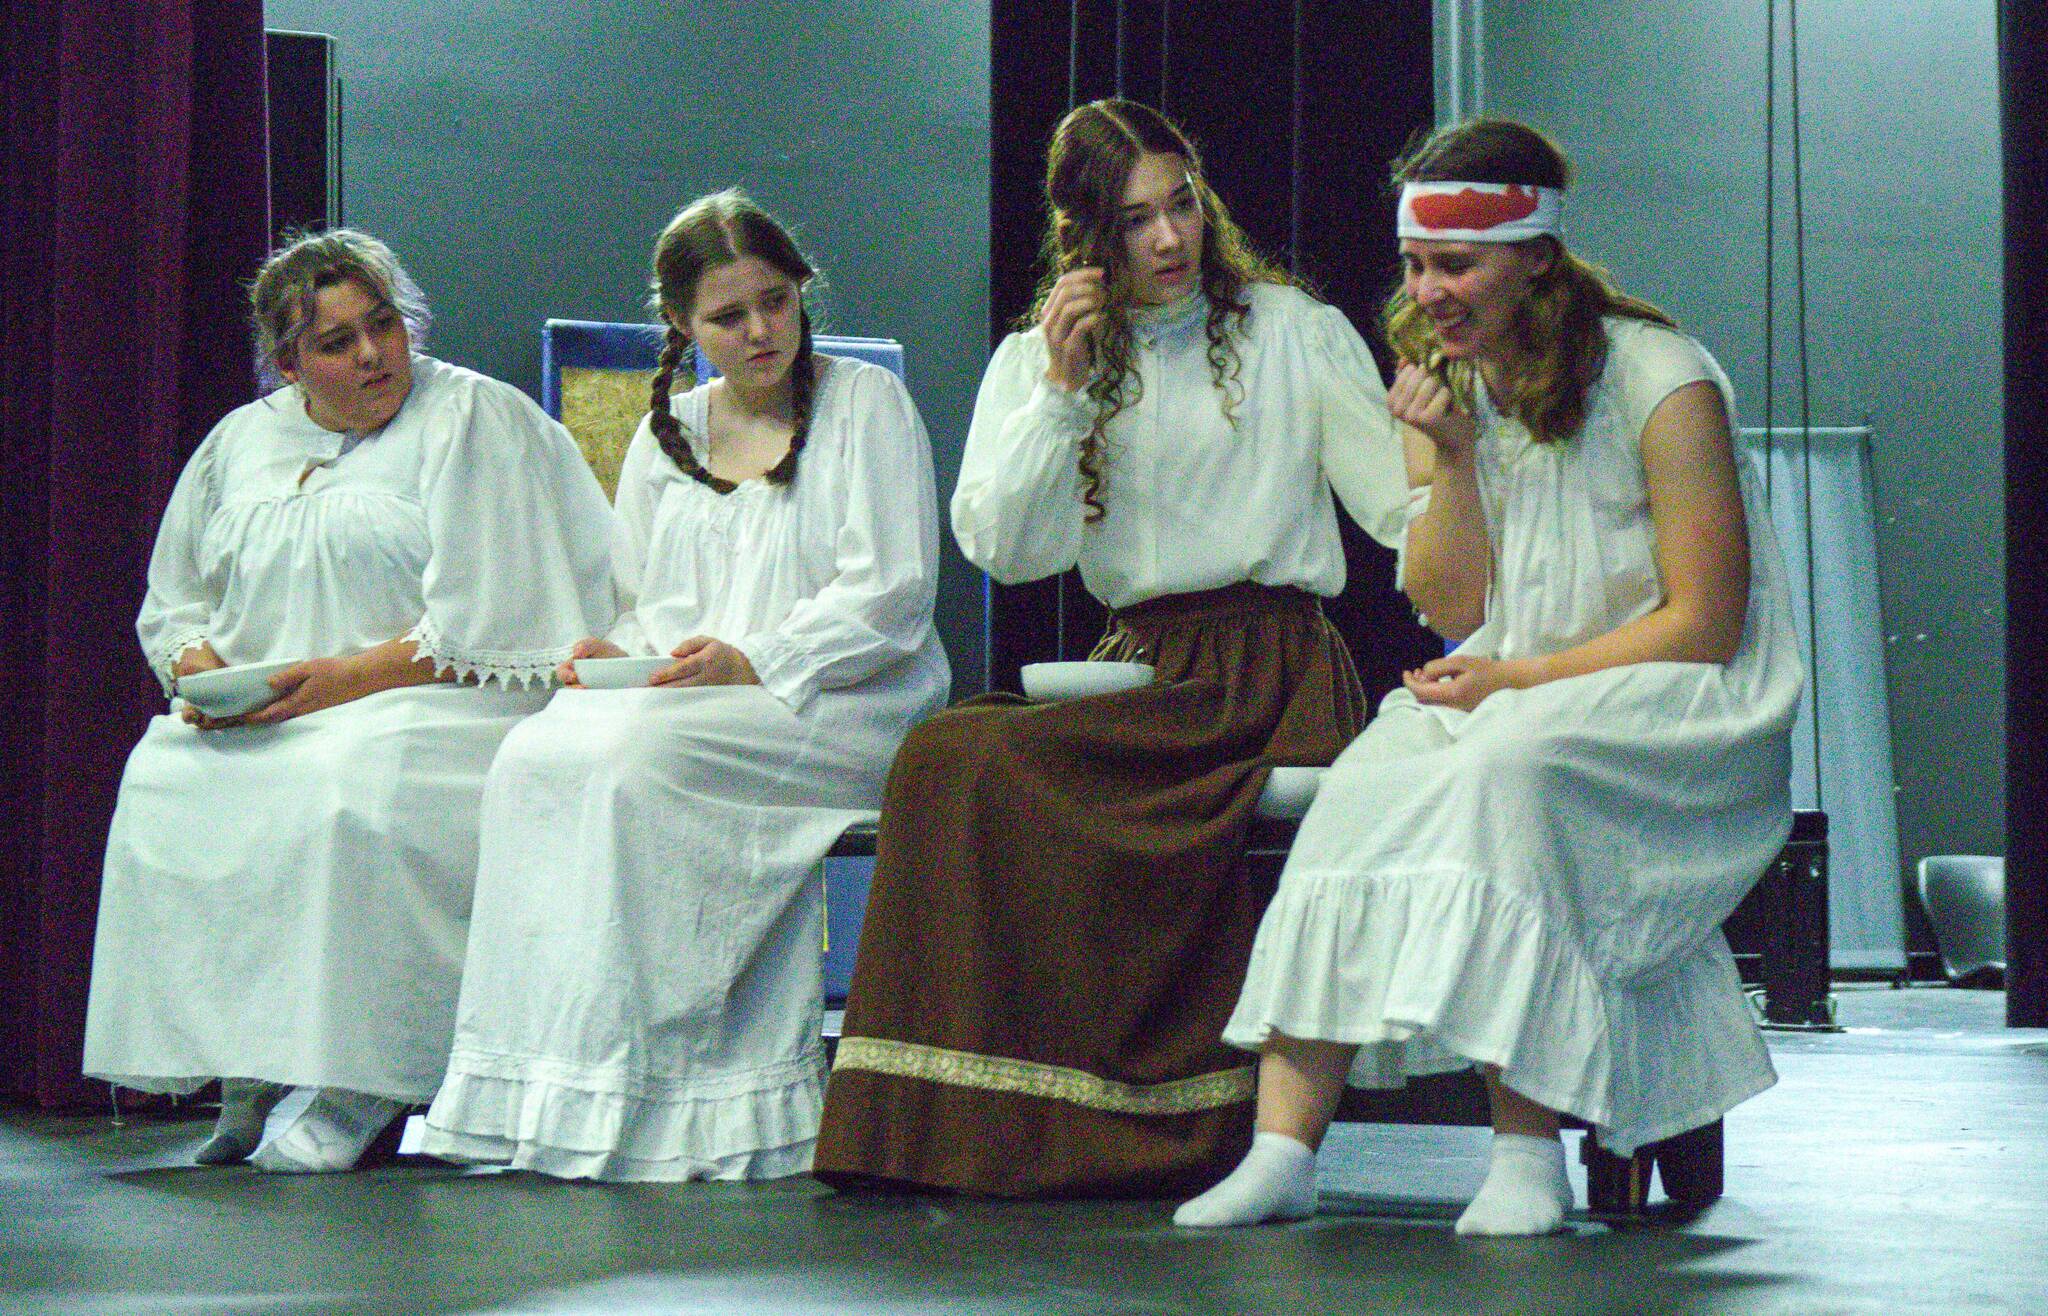 Students Linndsy Scheer, Piper Earhart, Adriana Froman and Savannah Dickinson during a scene of “Nellie.” (Photo by Luisa Loi)